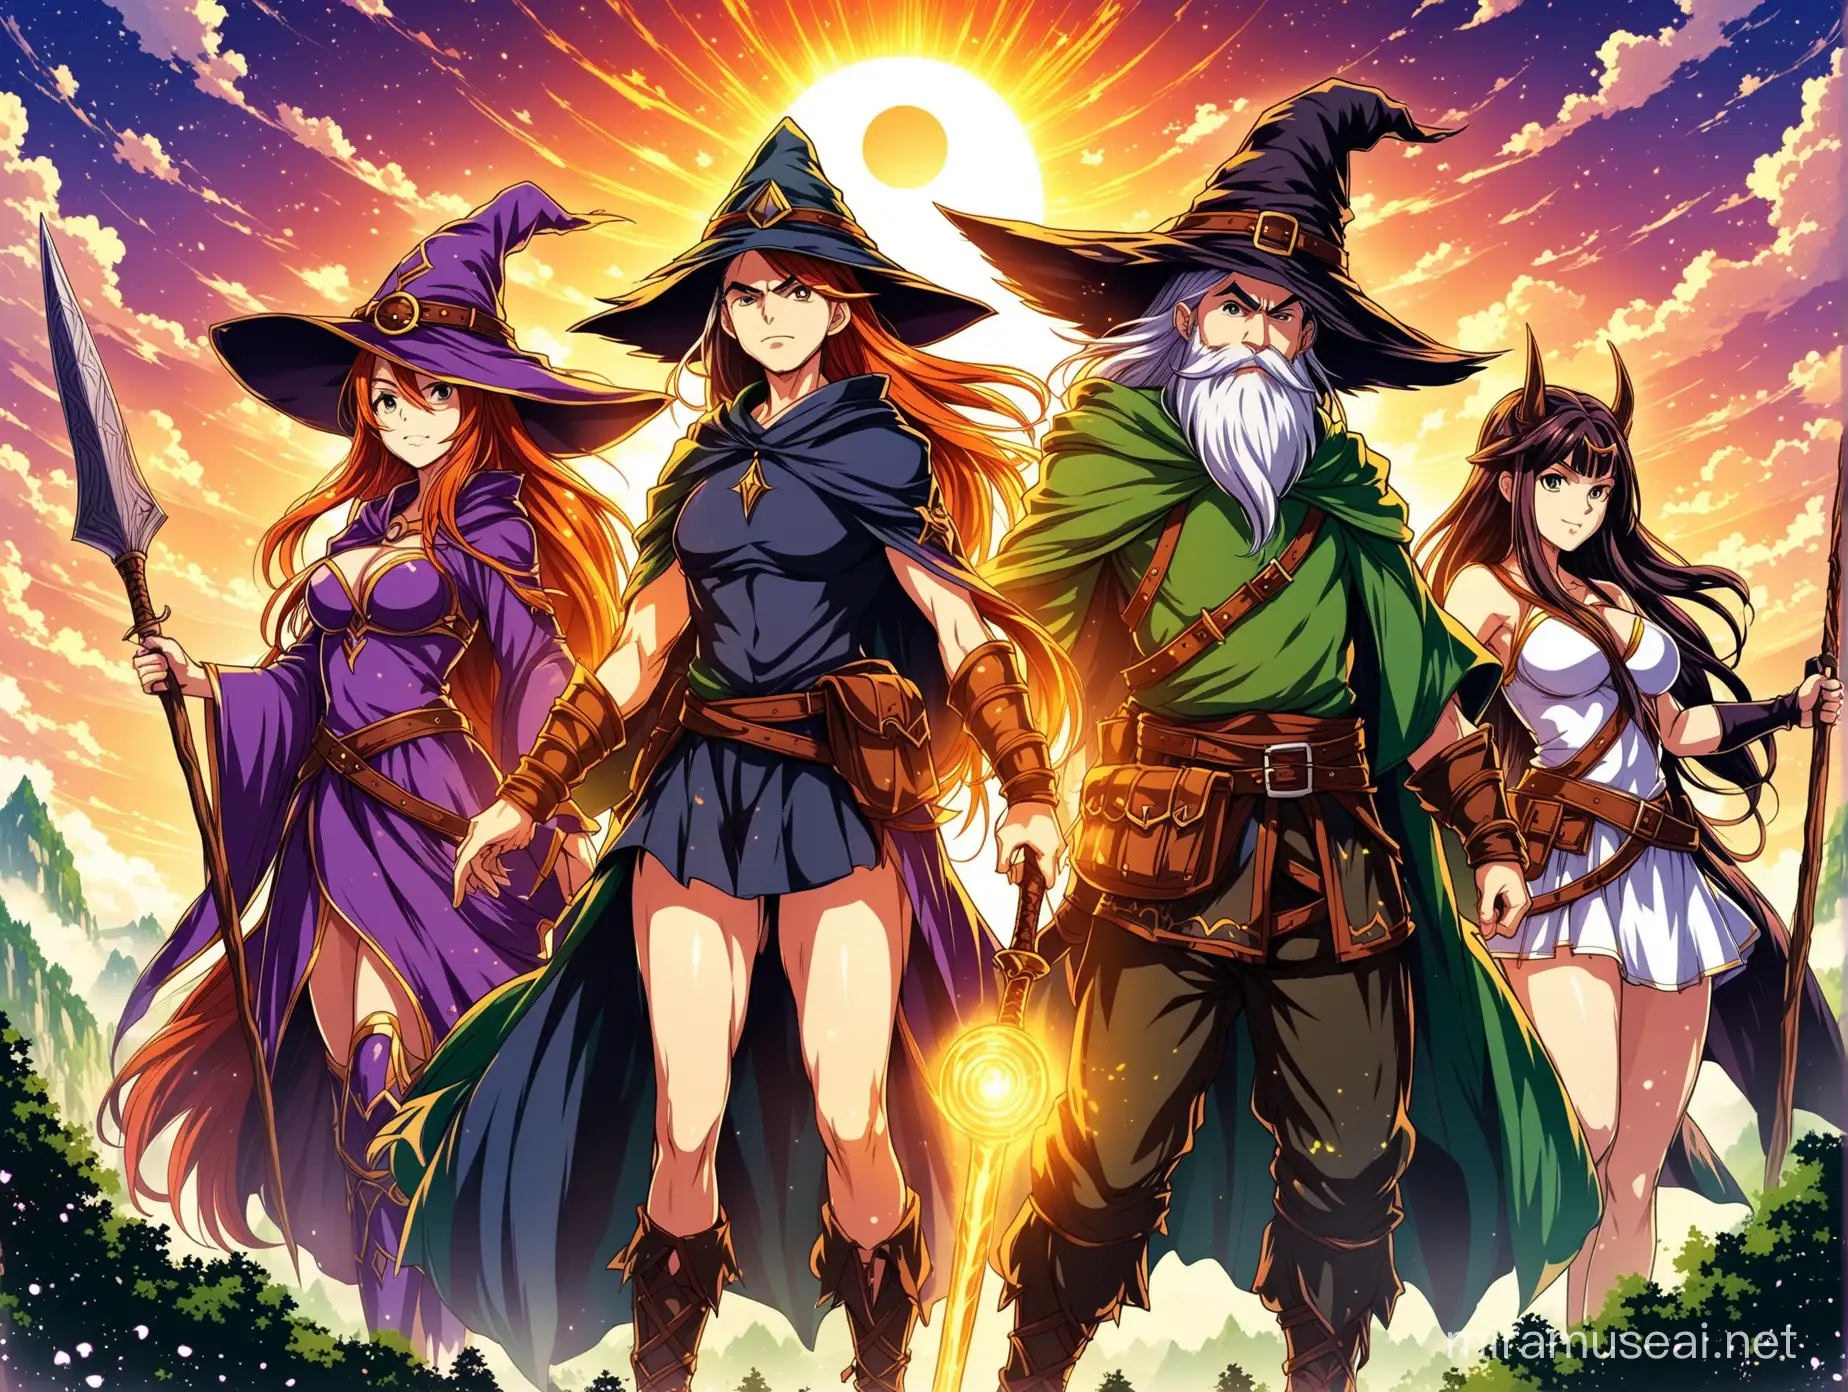 Anime Fantasy Poster Warrior Wizard Witch and Druid Unite in Battle